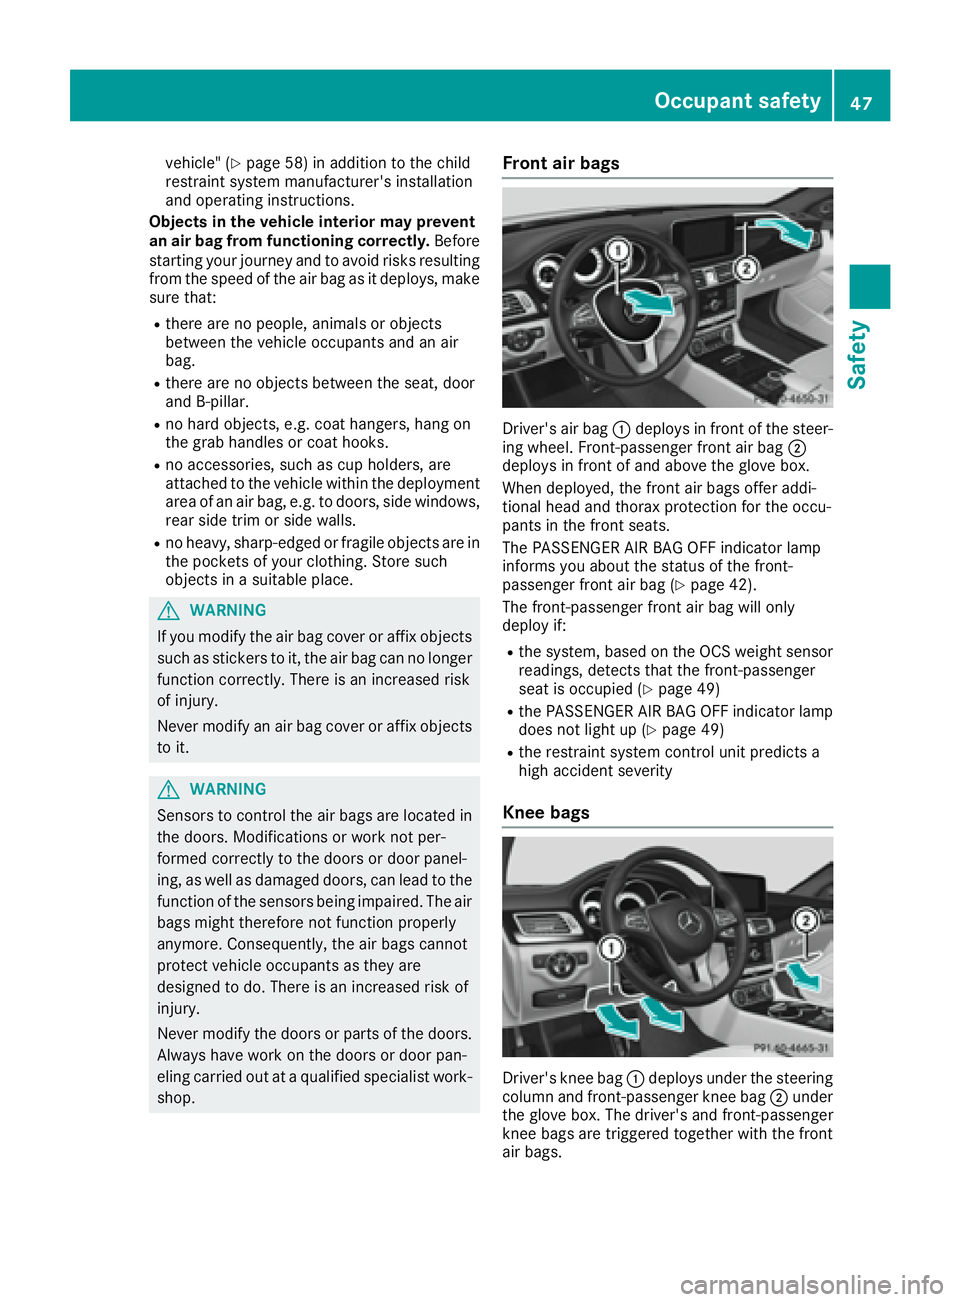 MERCEDES-BENZ CLS 2016  Owners Manual vehicle" ( Y
page 58) in addition to the child
restraint system manufacturer's installation
and operating instructions.
Objects in the vehicle interior may prevent
an air bag from functioning 